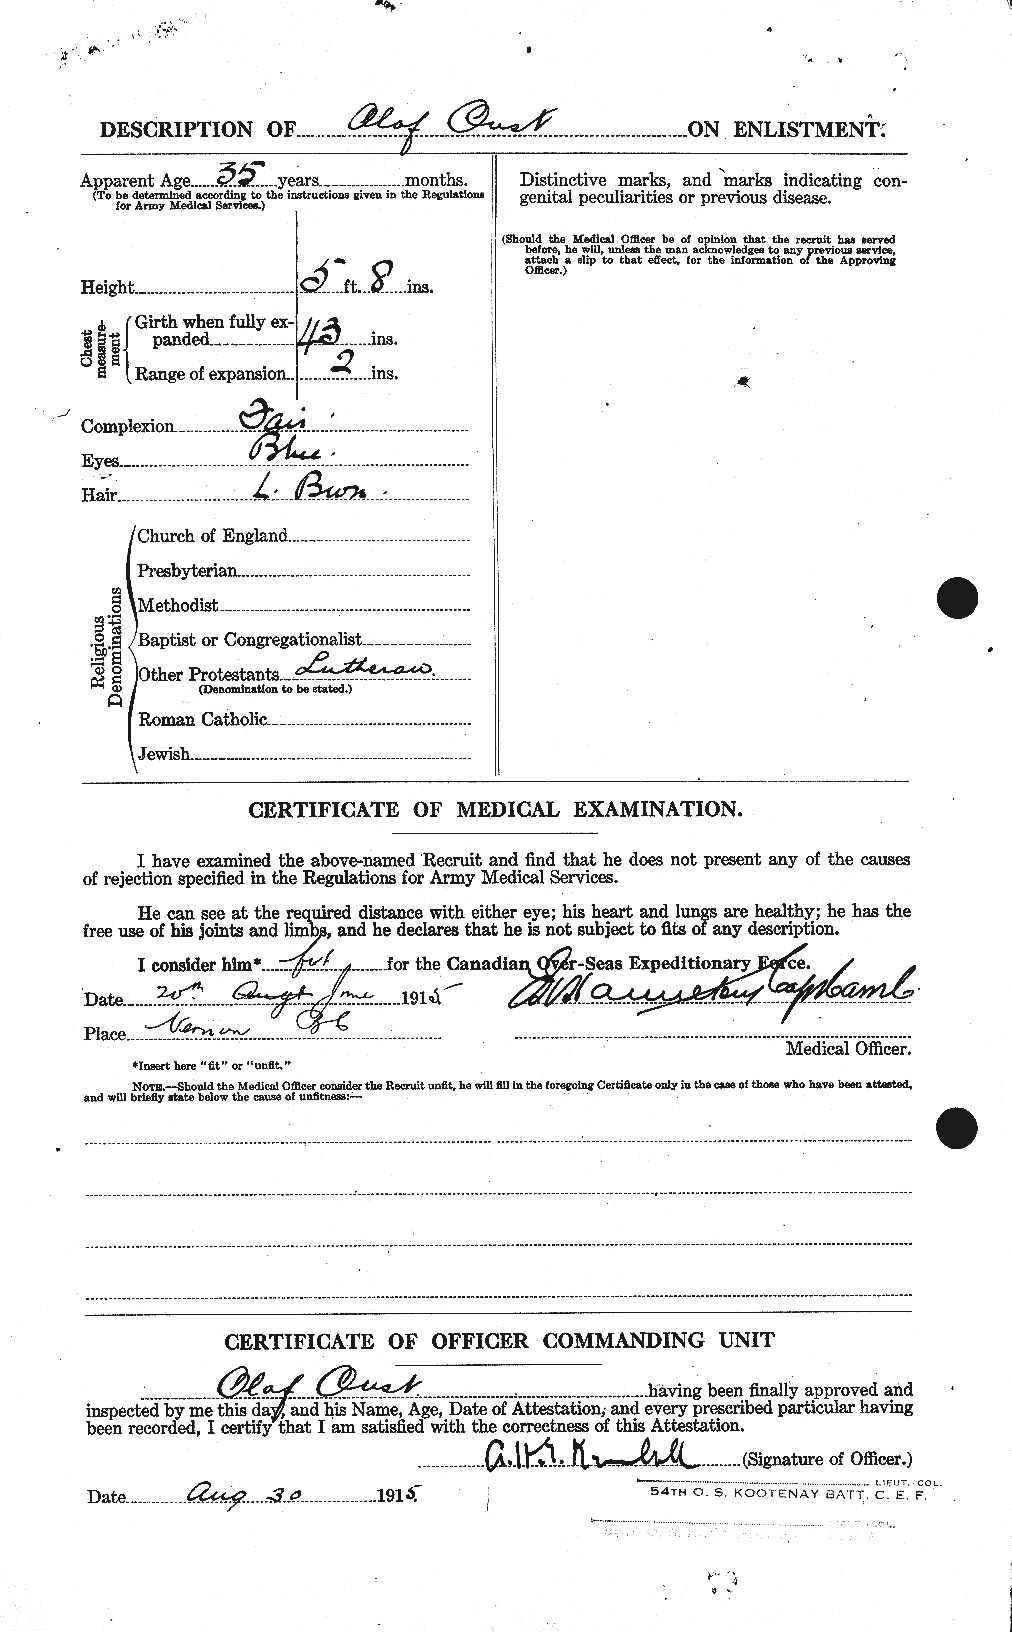 Personnel Records of the First World War - CEF 560991b